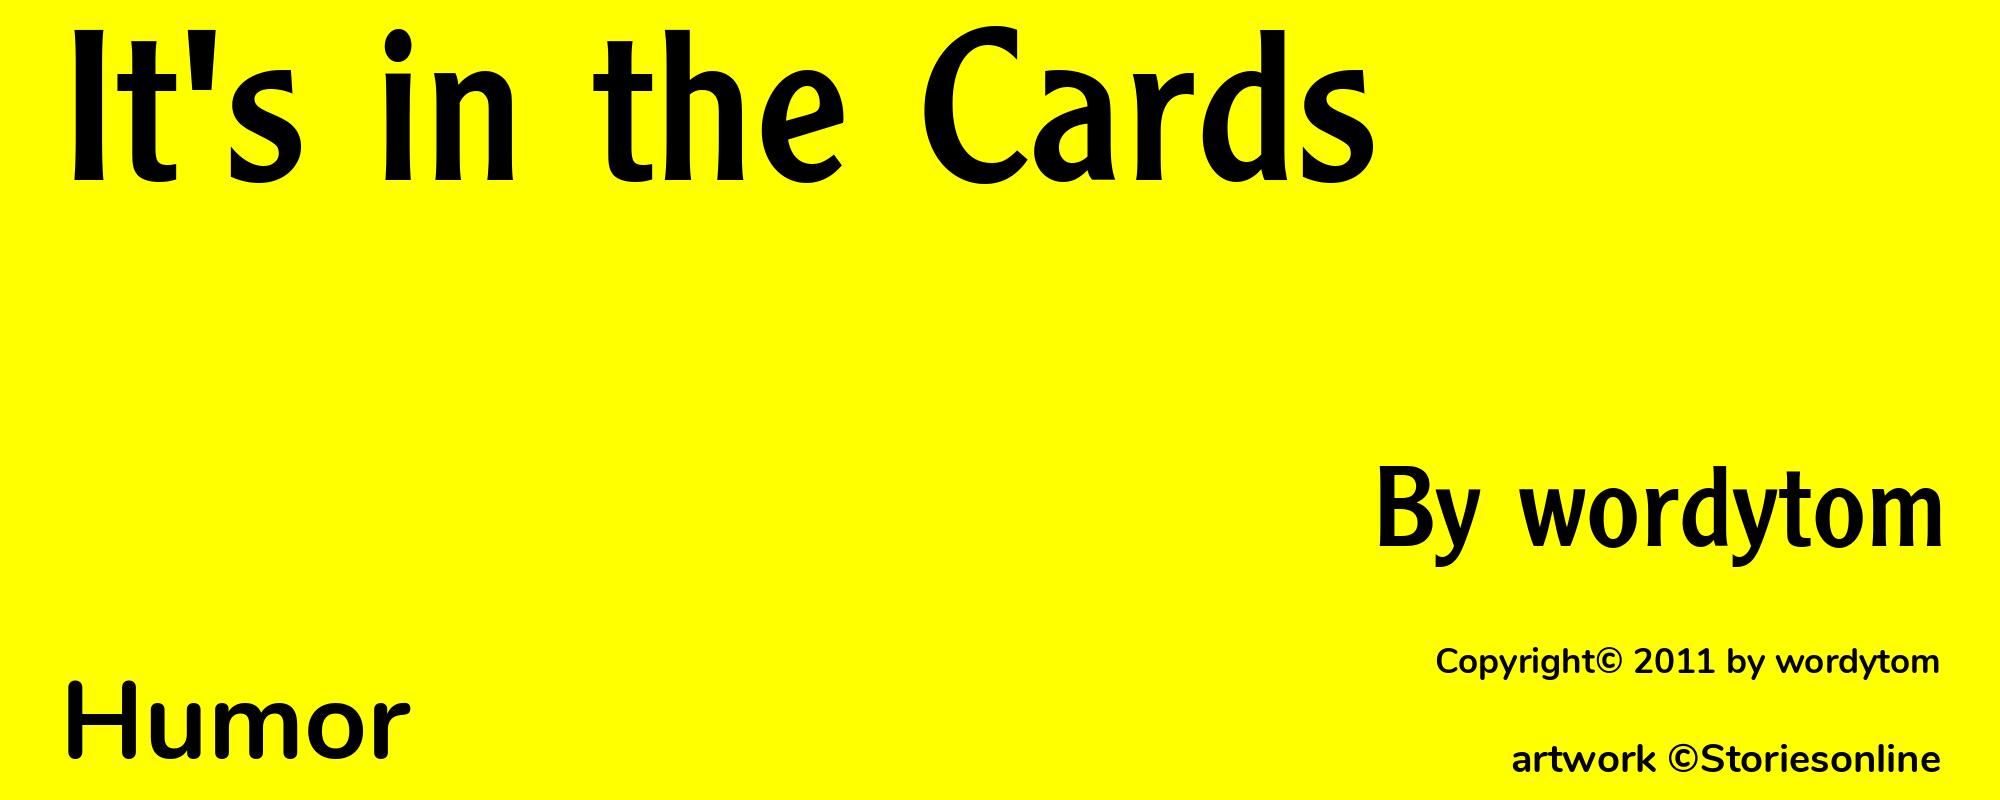 It's in the Cards - Cover